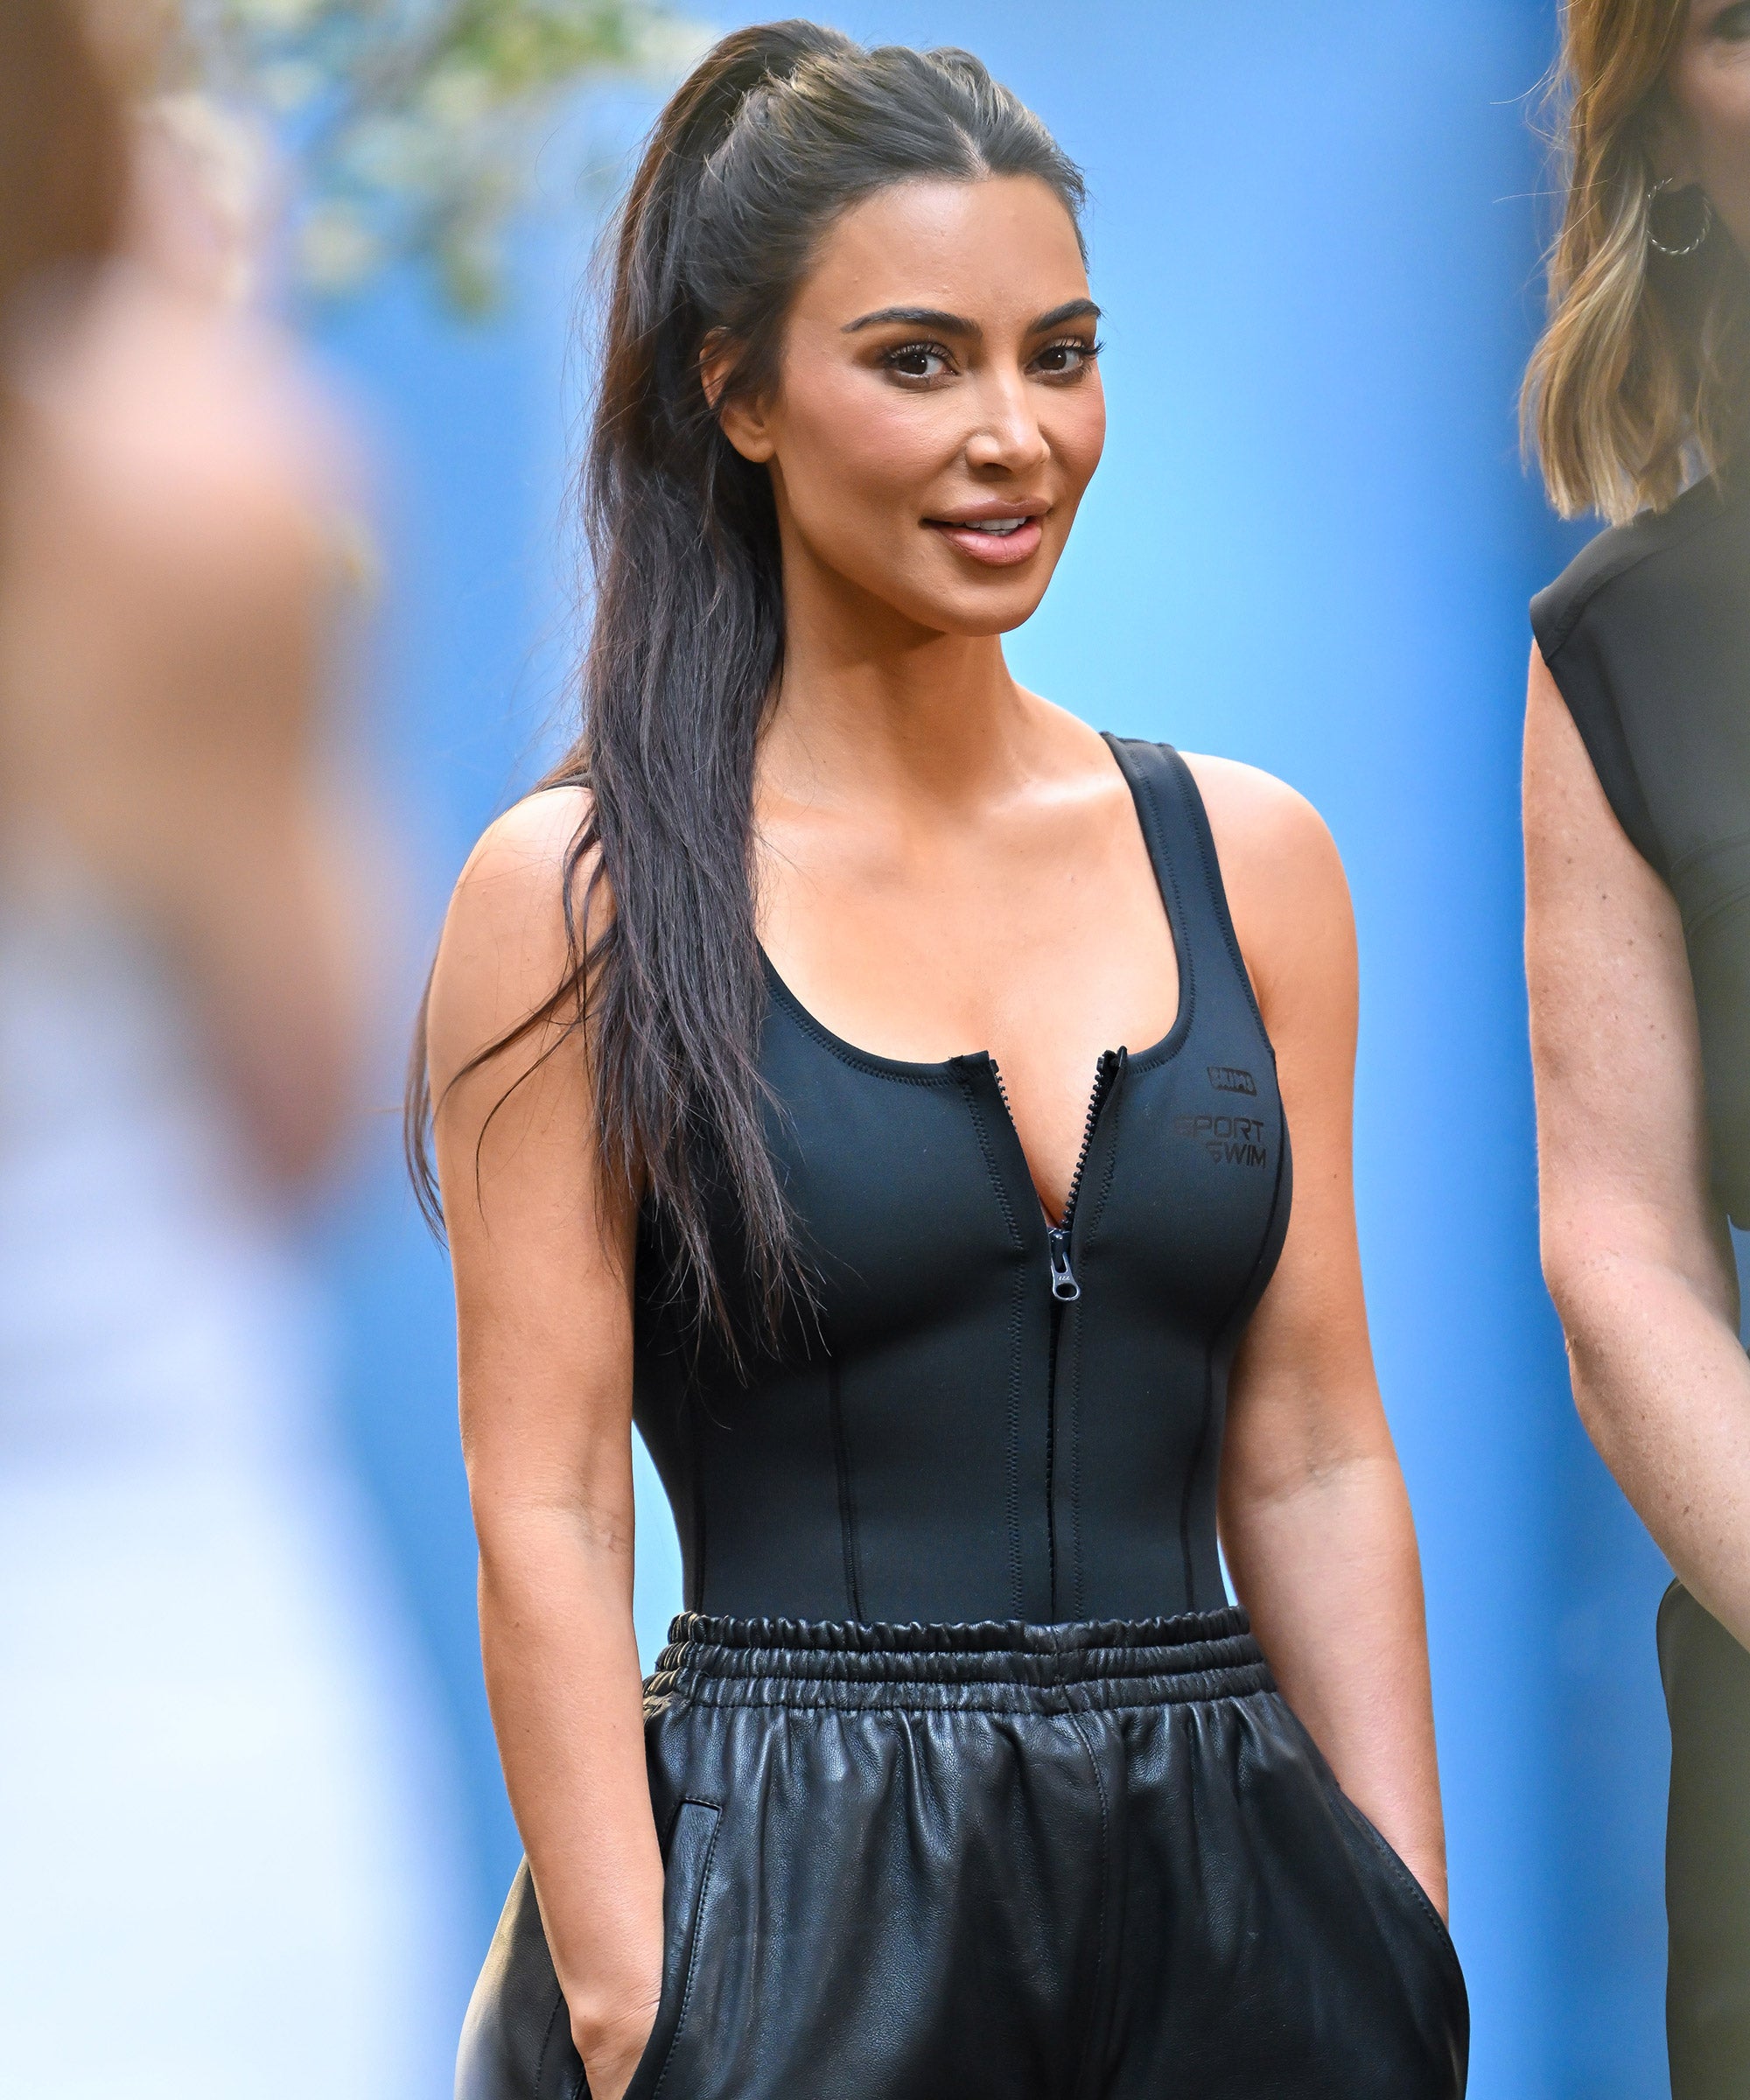 Kim Kardashian has a 'very serious' question about her look